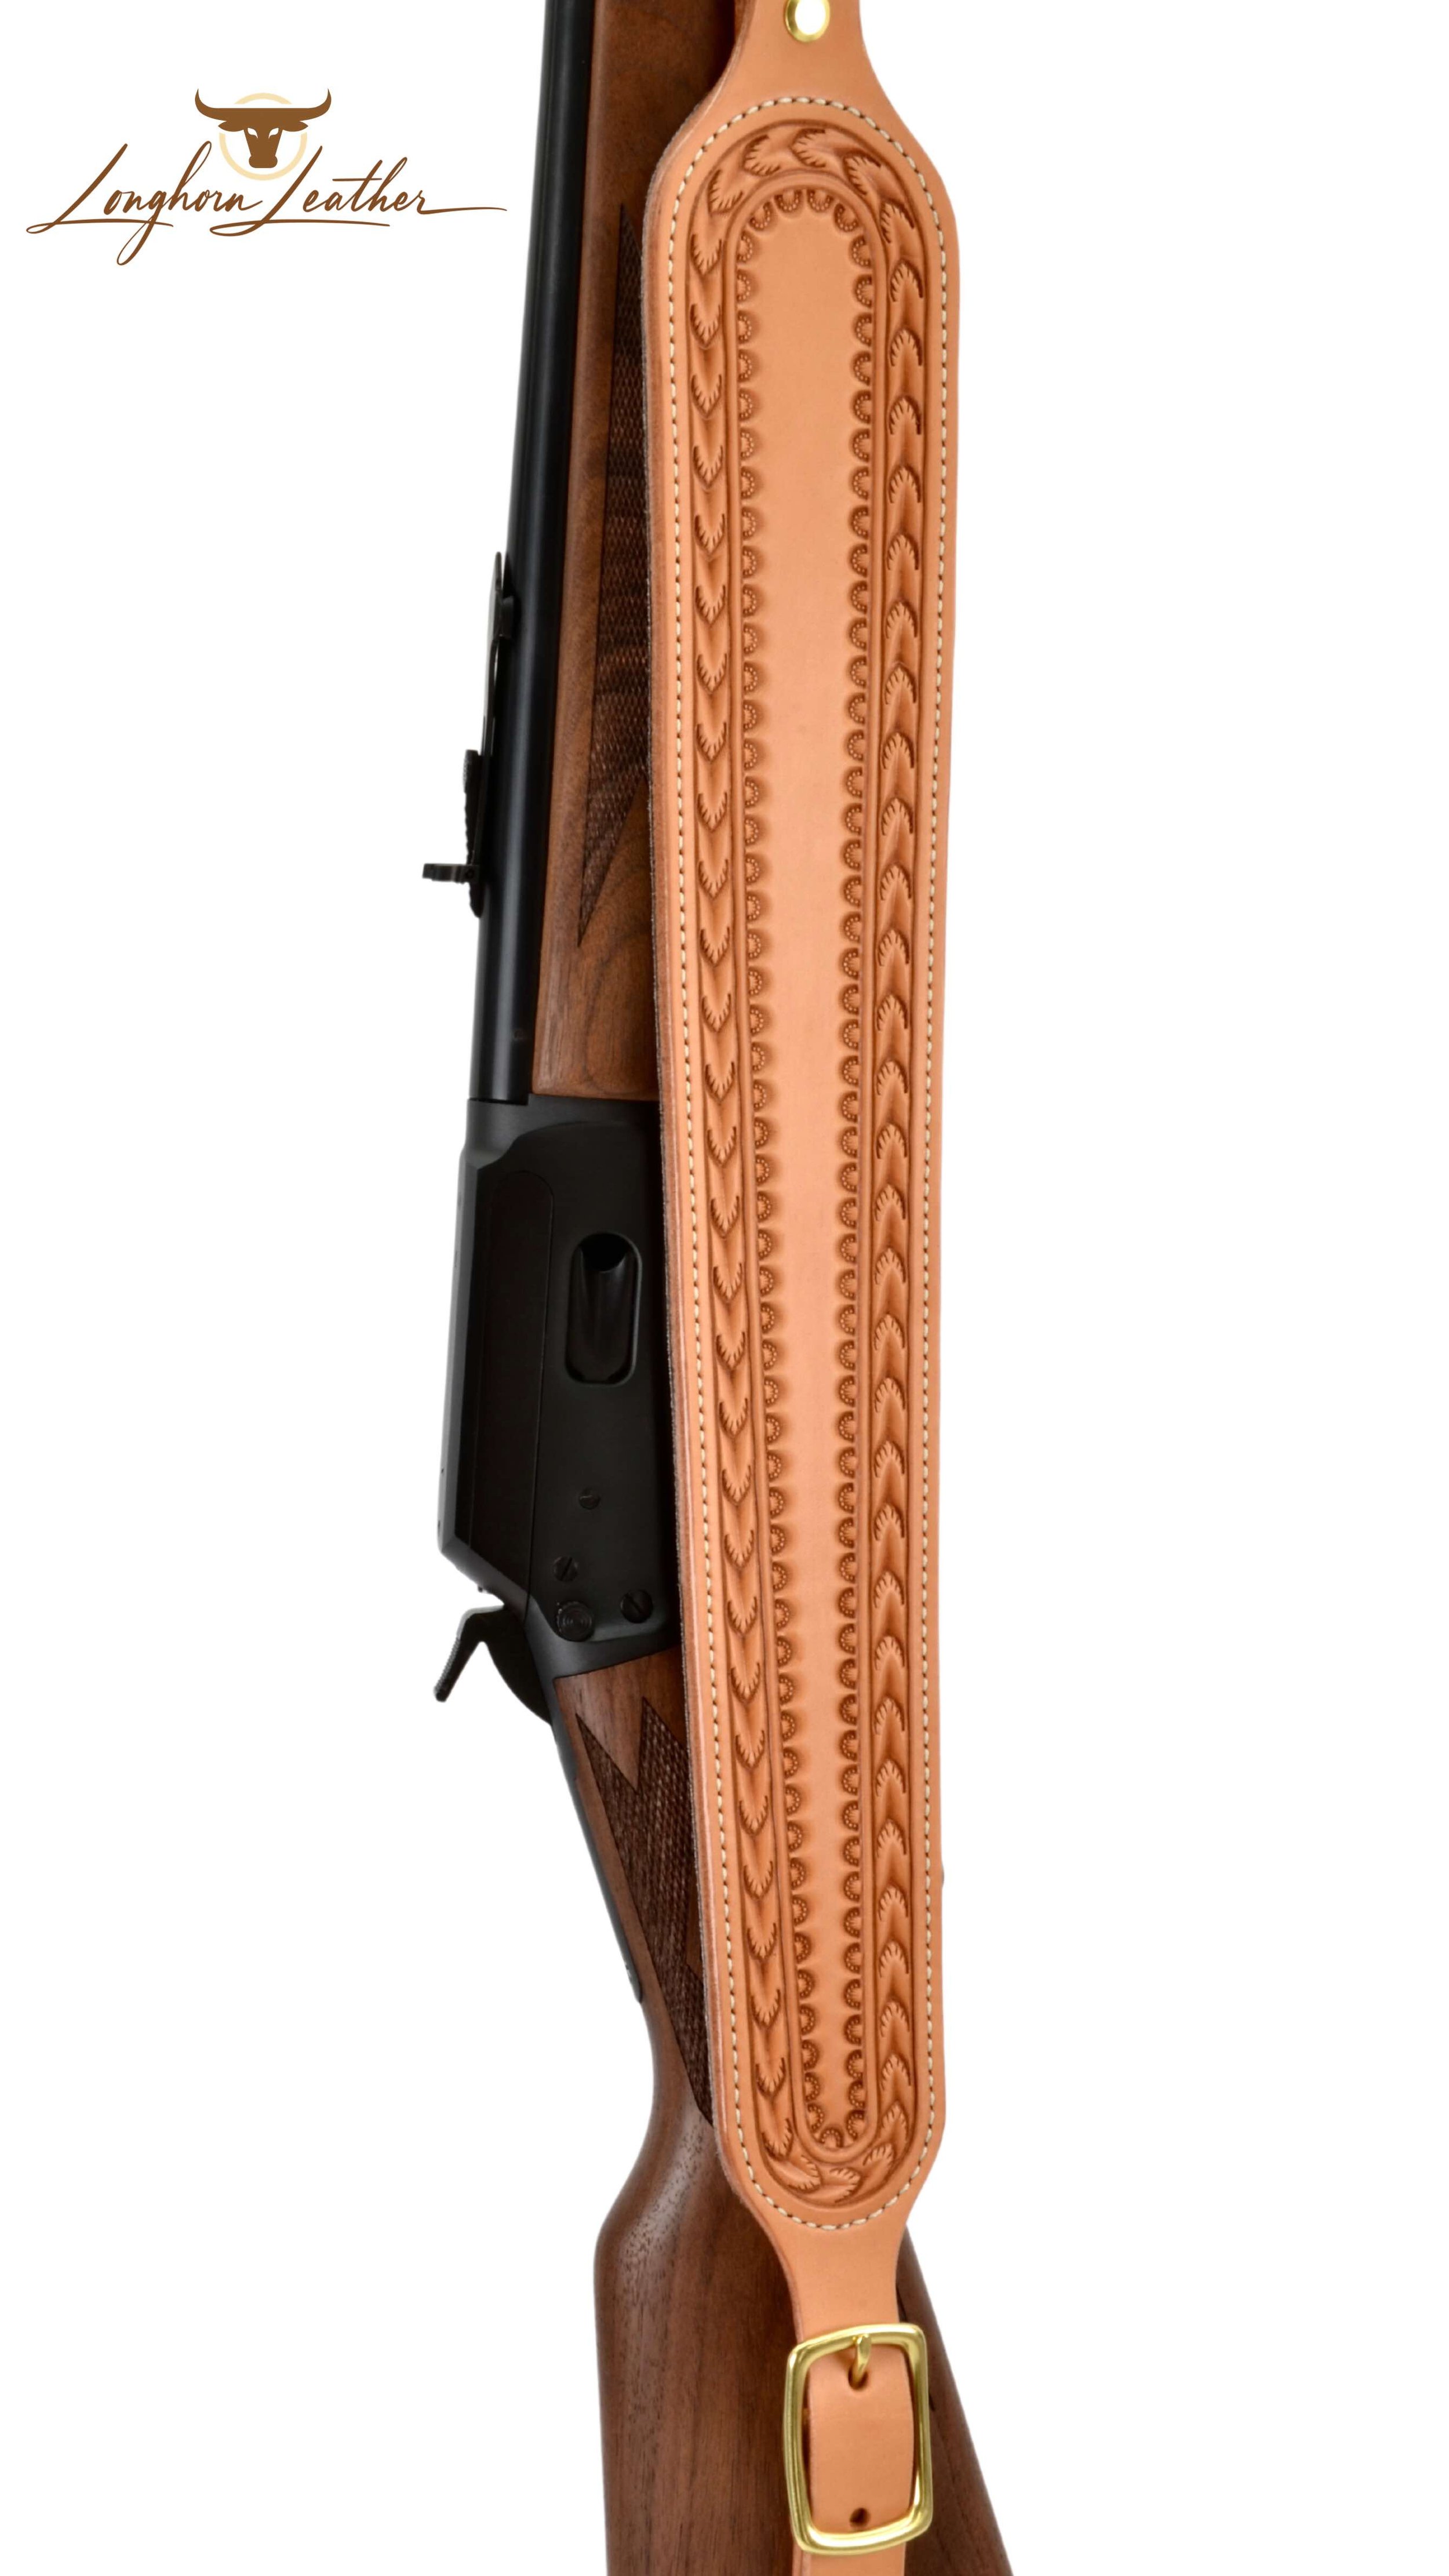 Custom leather rifle sling featuring the Nogales design.  Individually handcrafted at Longhorn Leather AZ